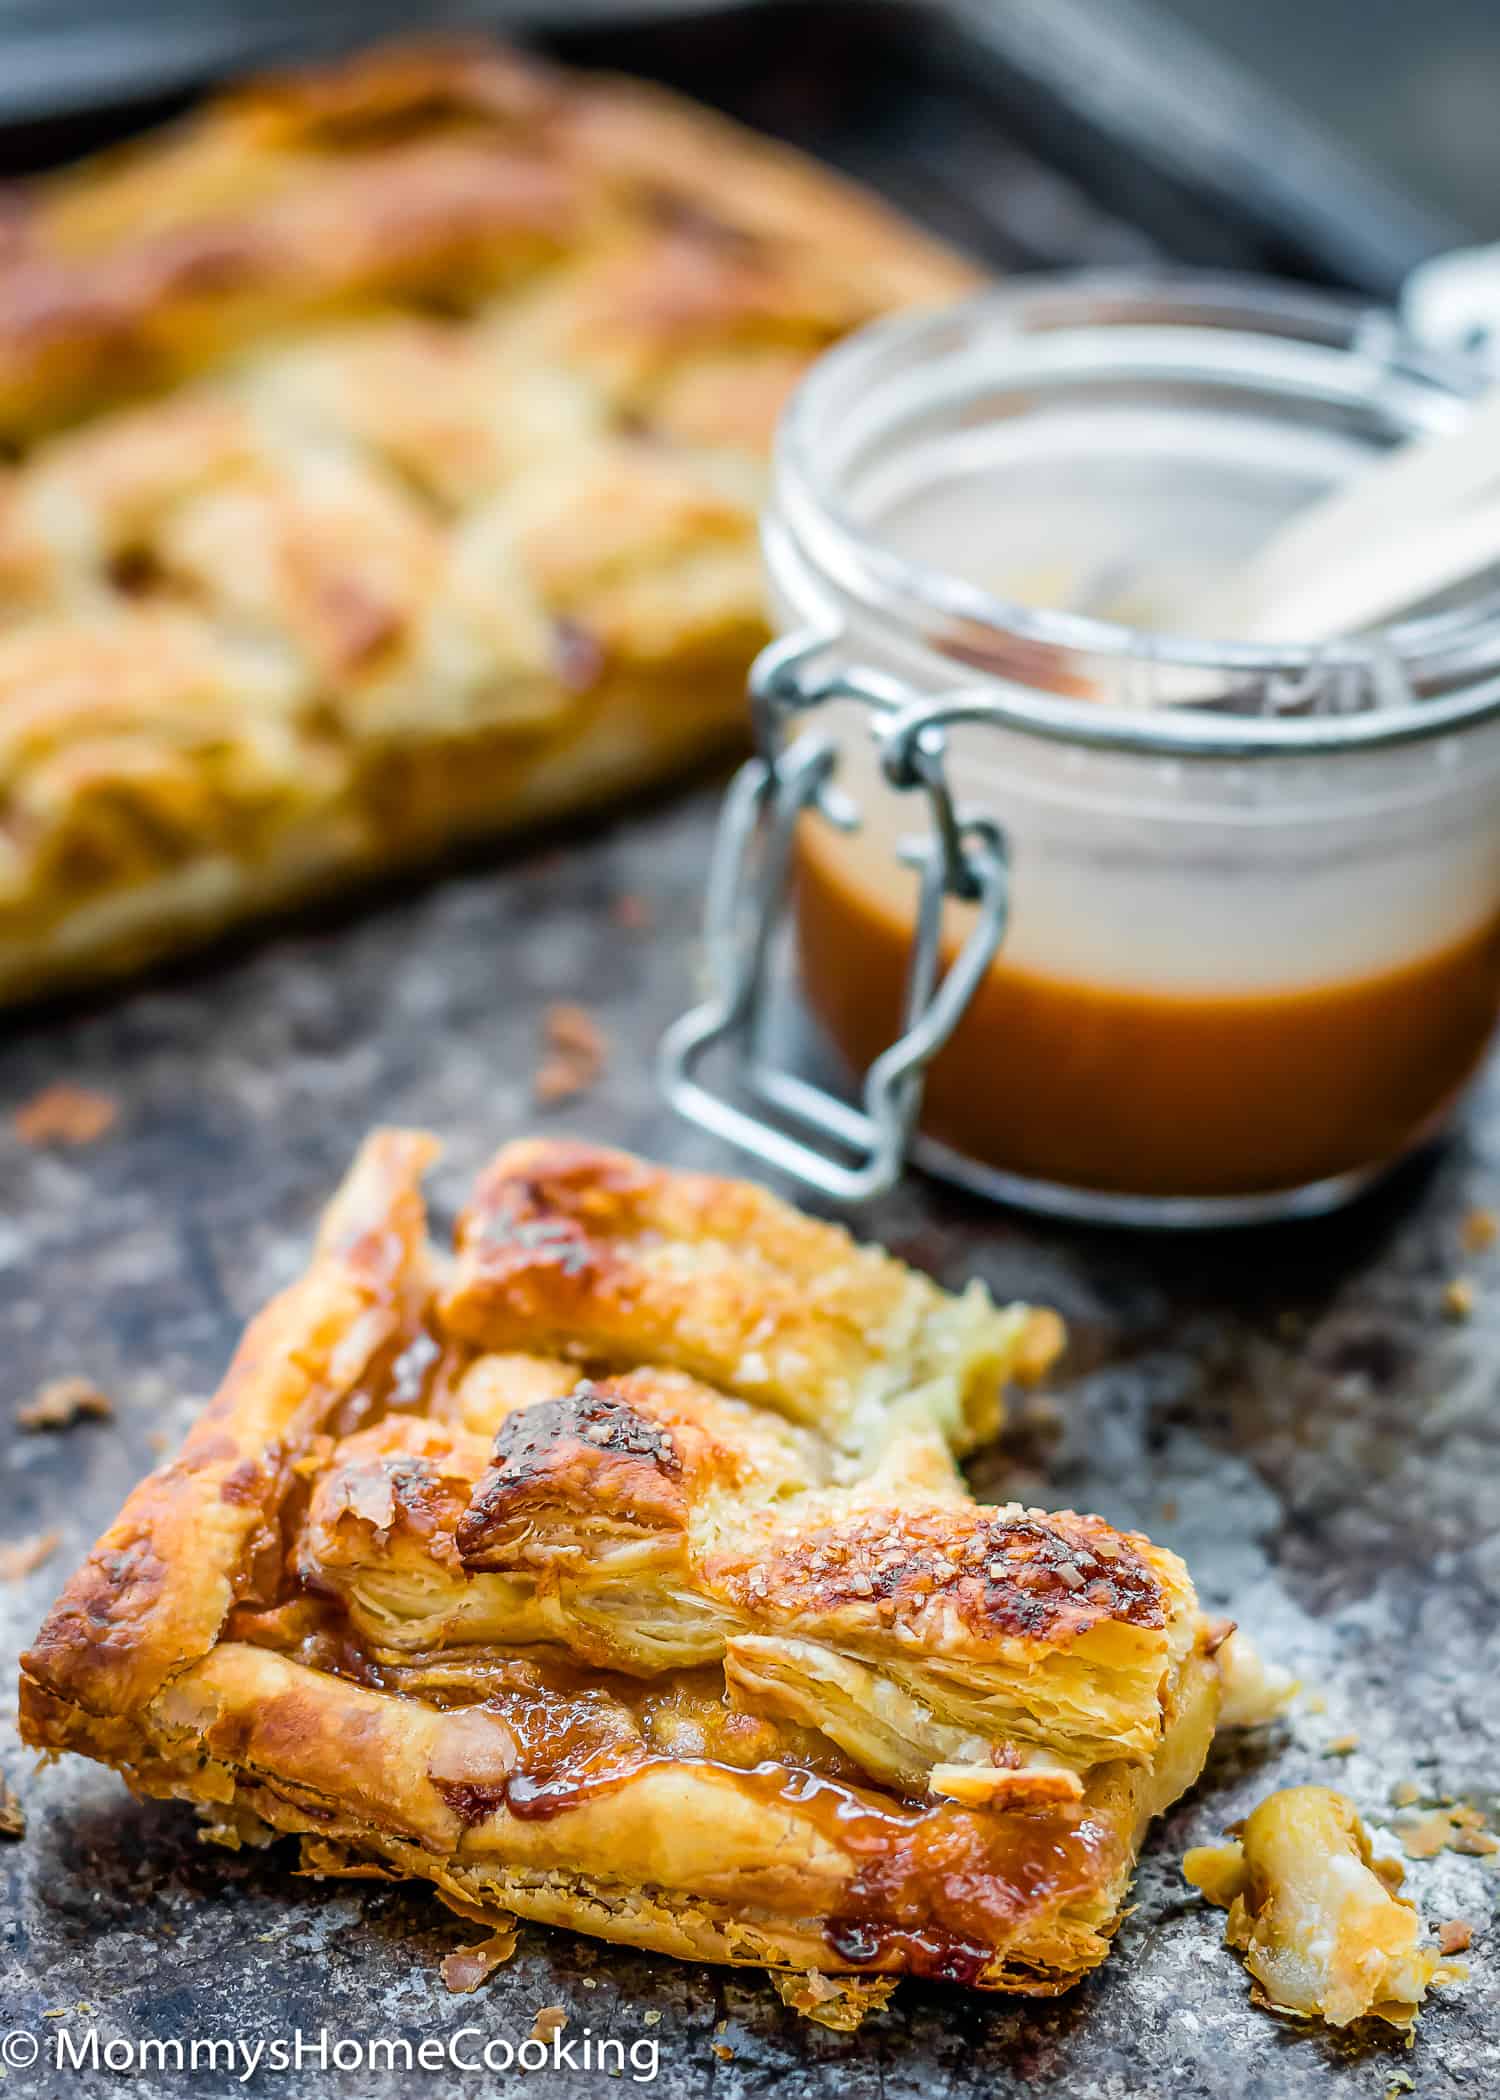 a portion of Eggless Salted Caramel Apple Cheese Danish with salted caramel jar in the background.